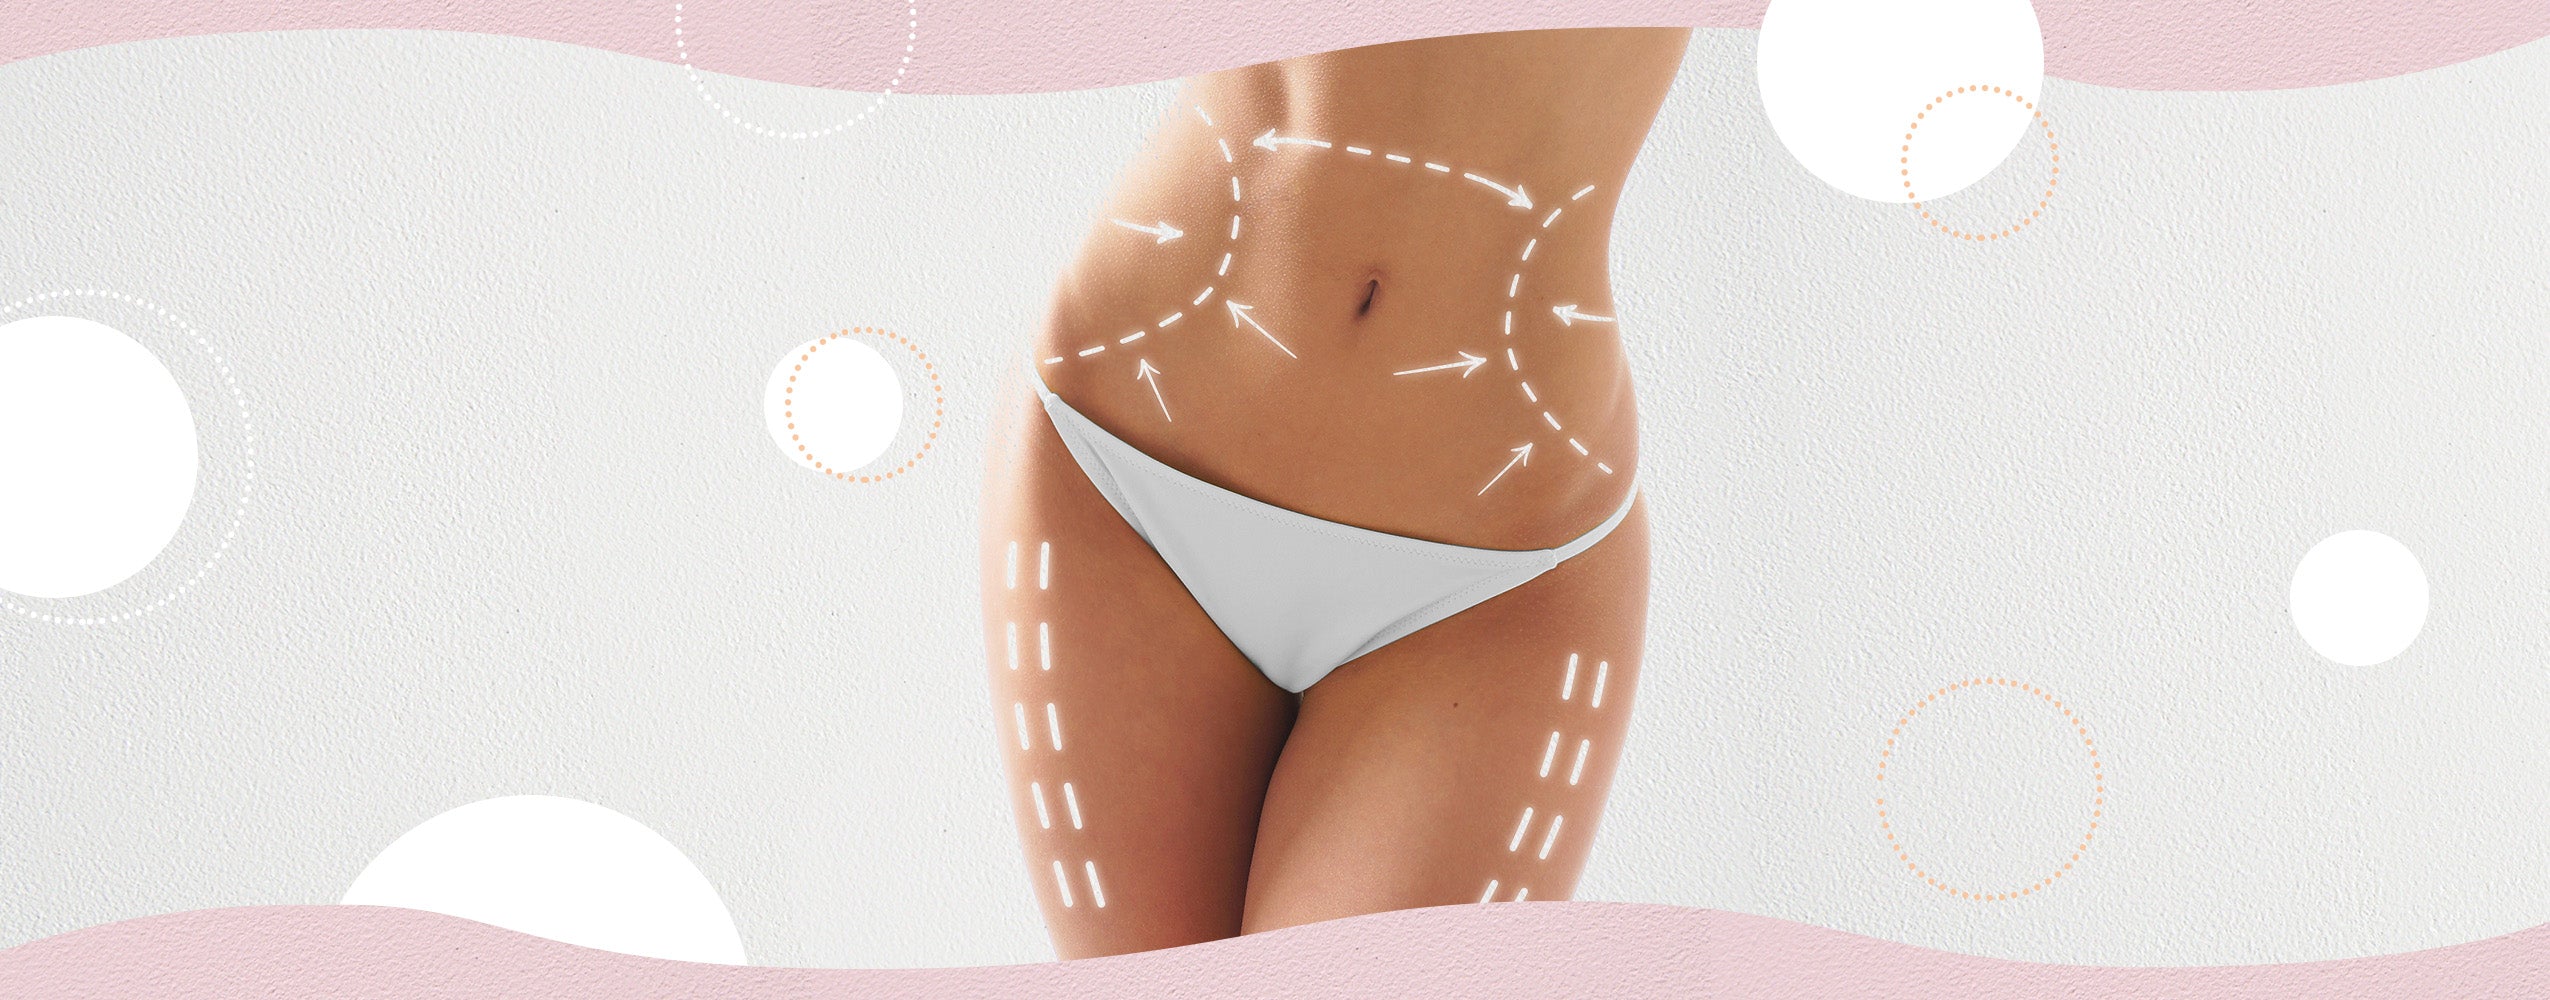 How long to wear spanx after Tummy Tuck?